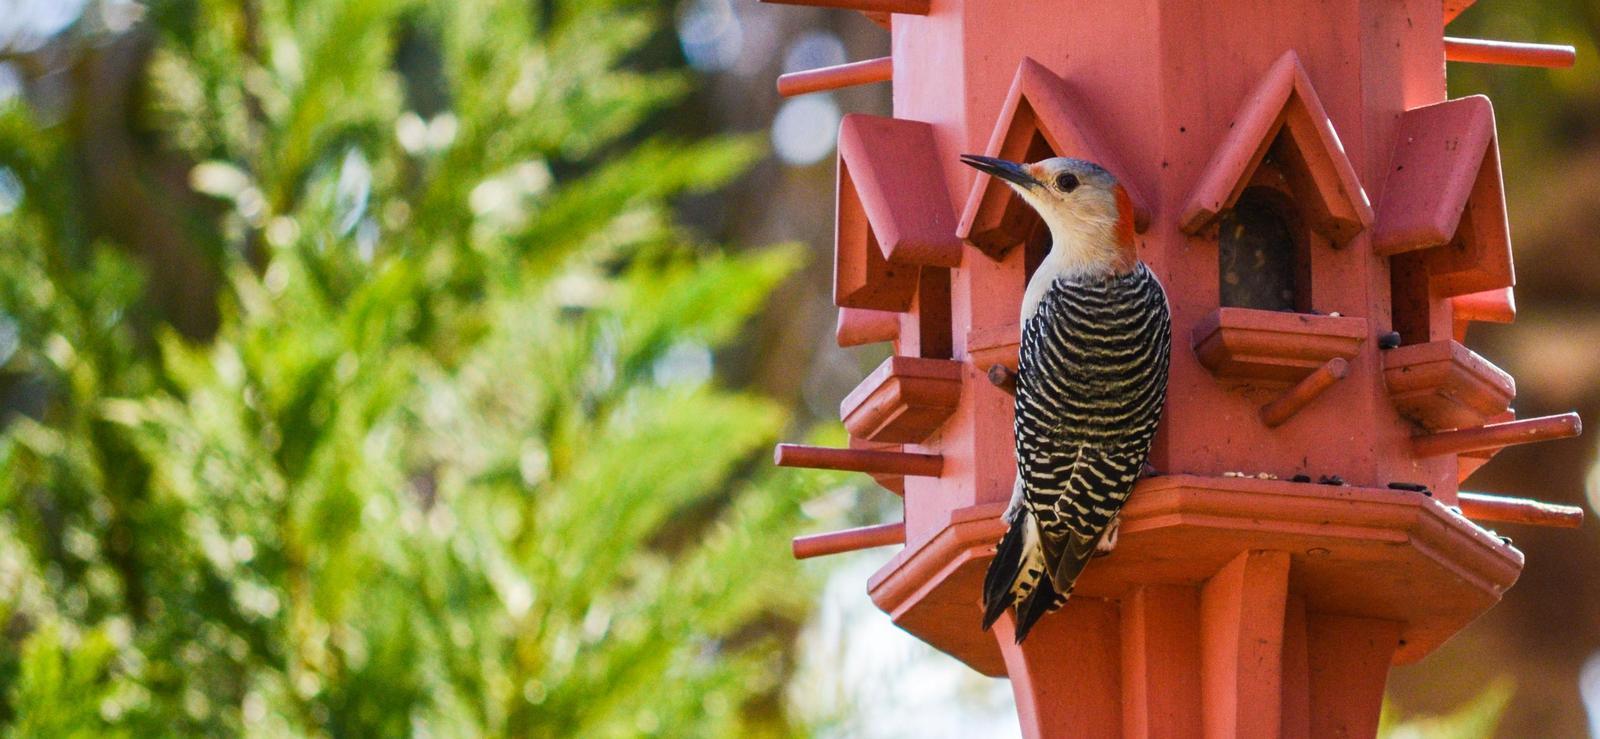 Red-bellied Woodpecker Photo by Mike Ballentine